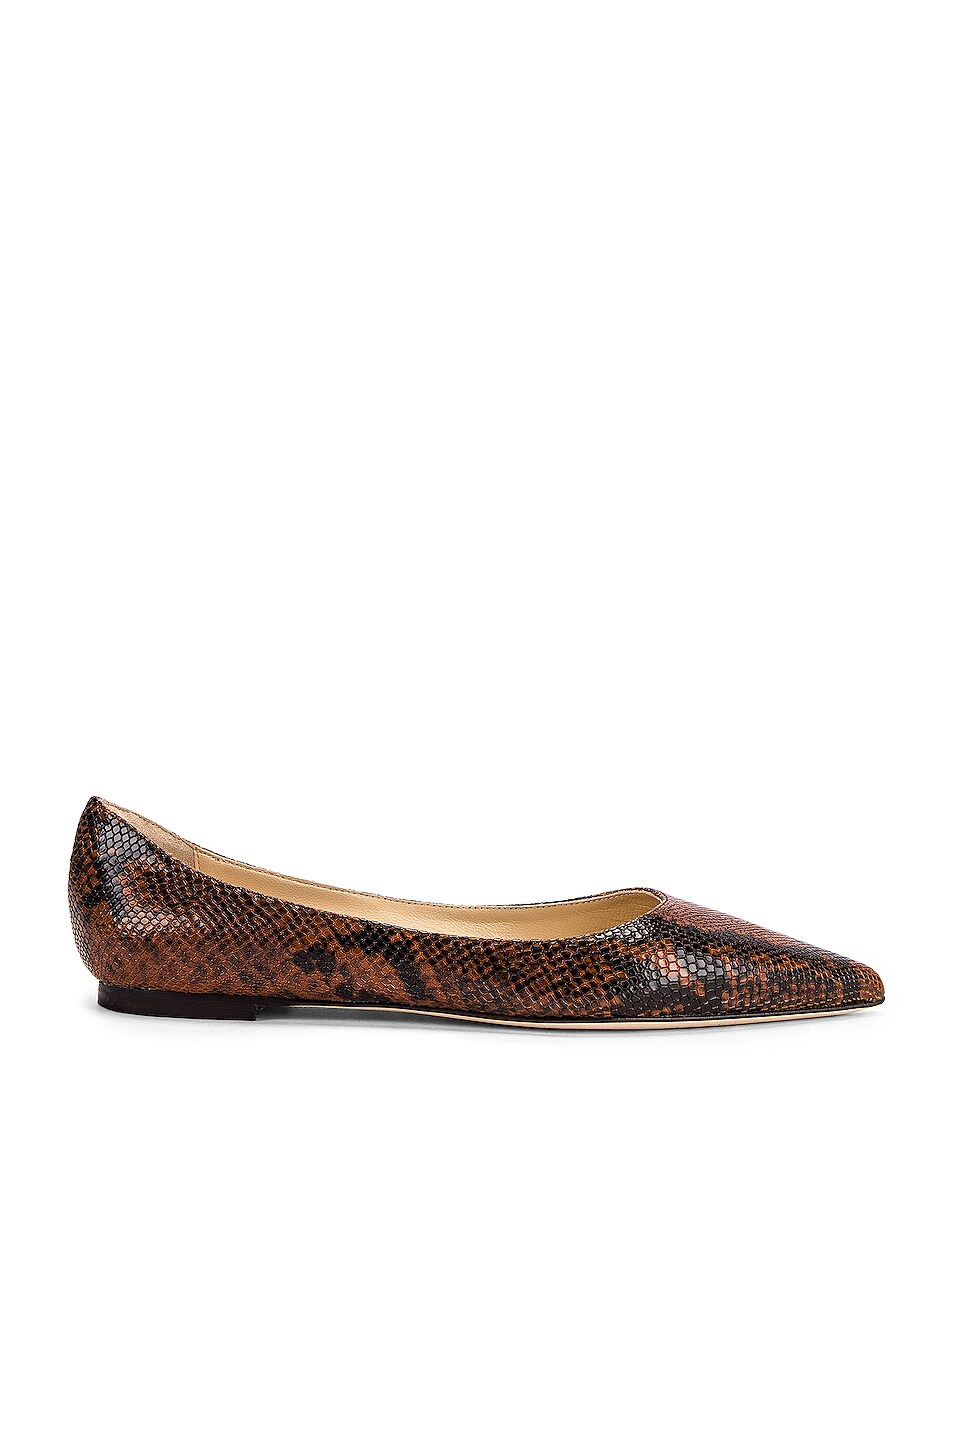 Image 1 of Jimmy Choo Love Snake Print Flat in Cuoio